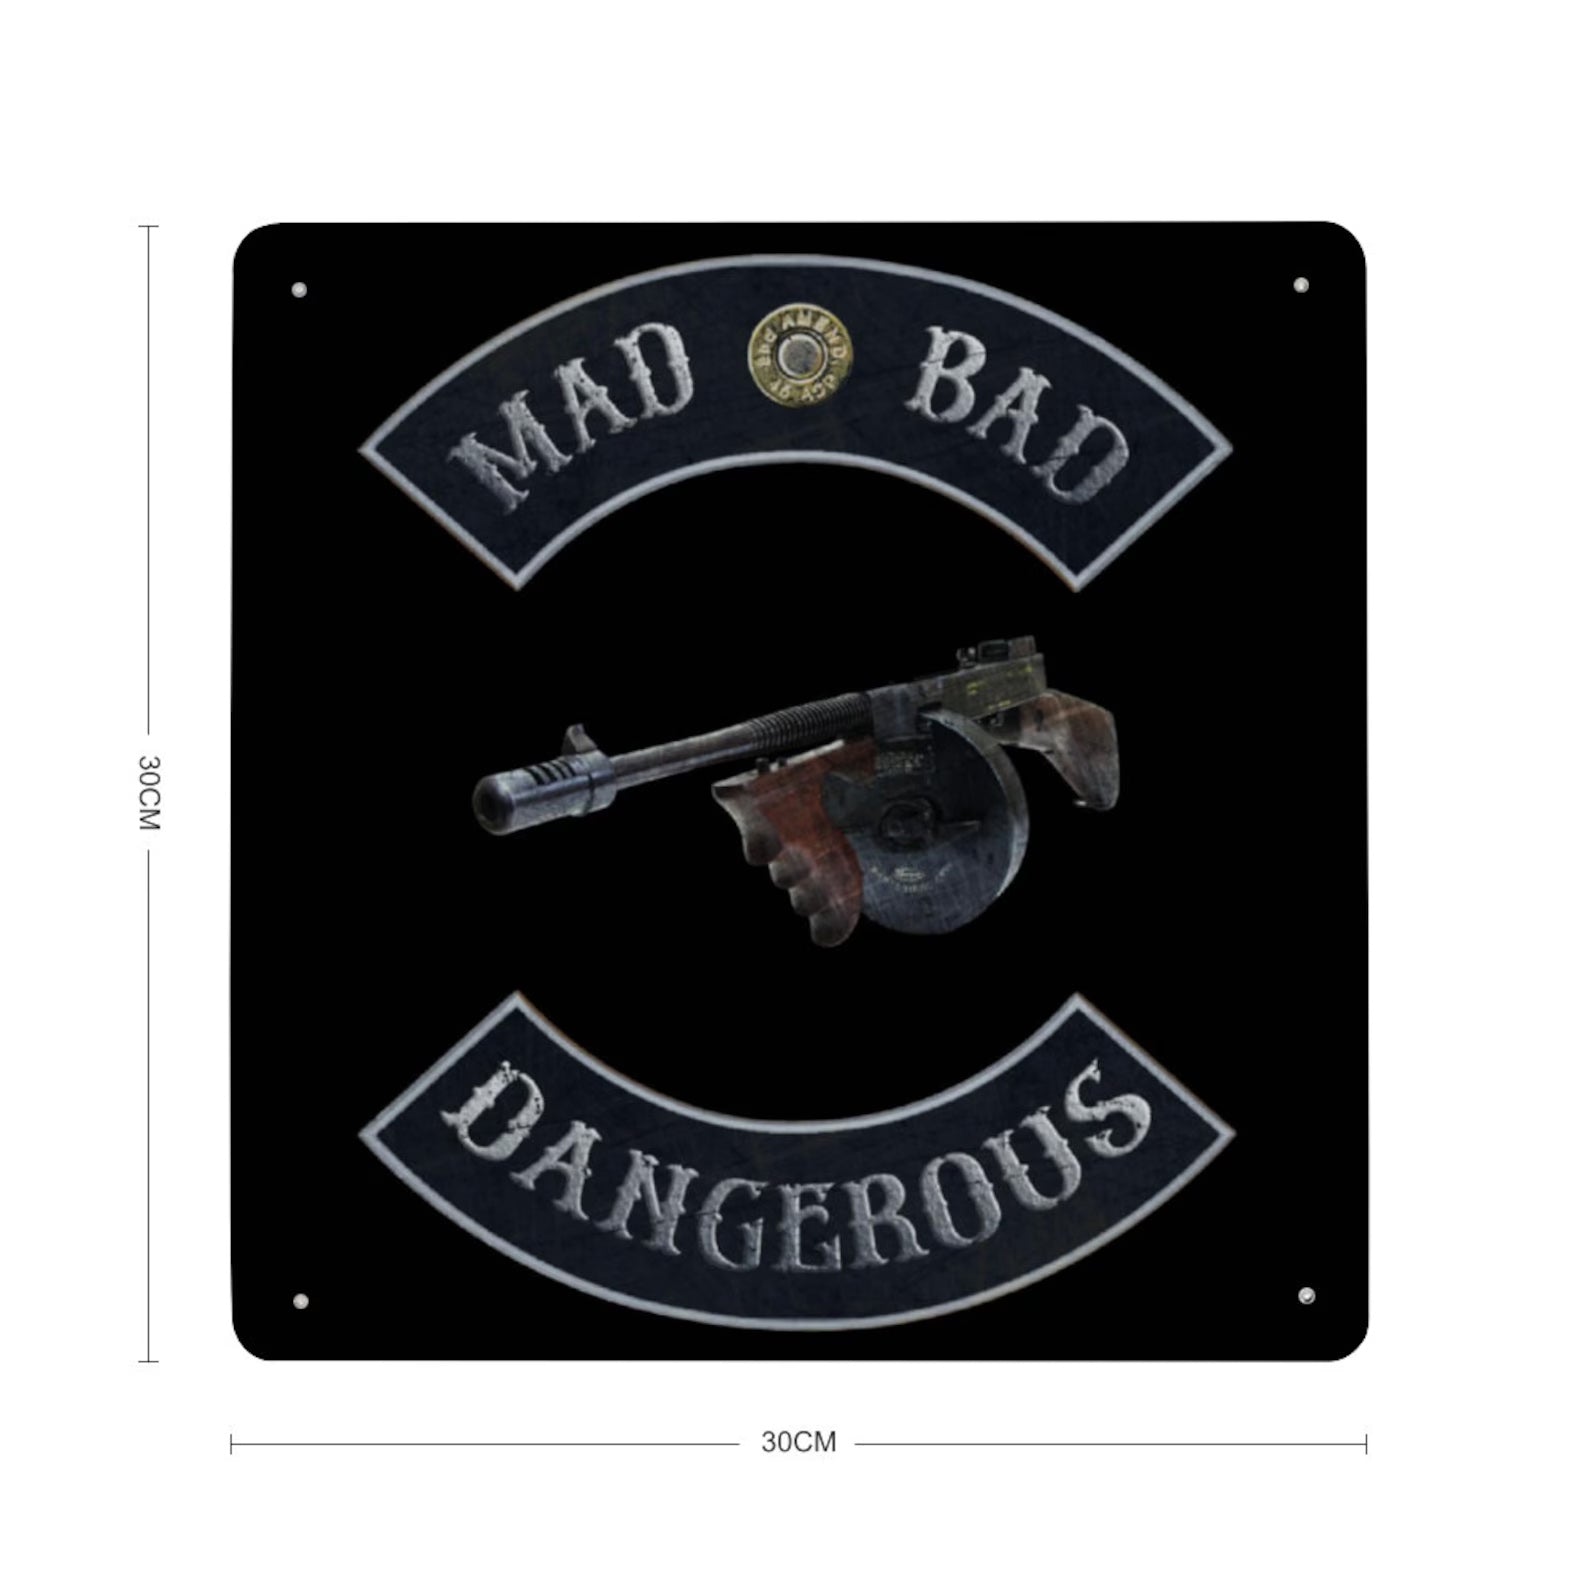 Mad Bad and Dangerous with Tommy Gun Print on Metal with dimensions